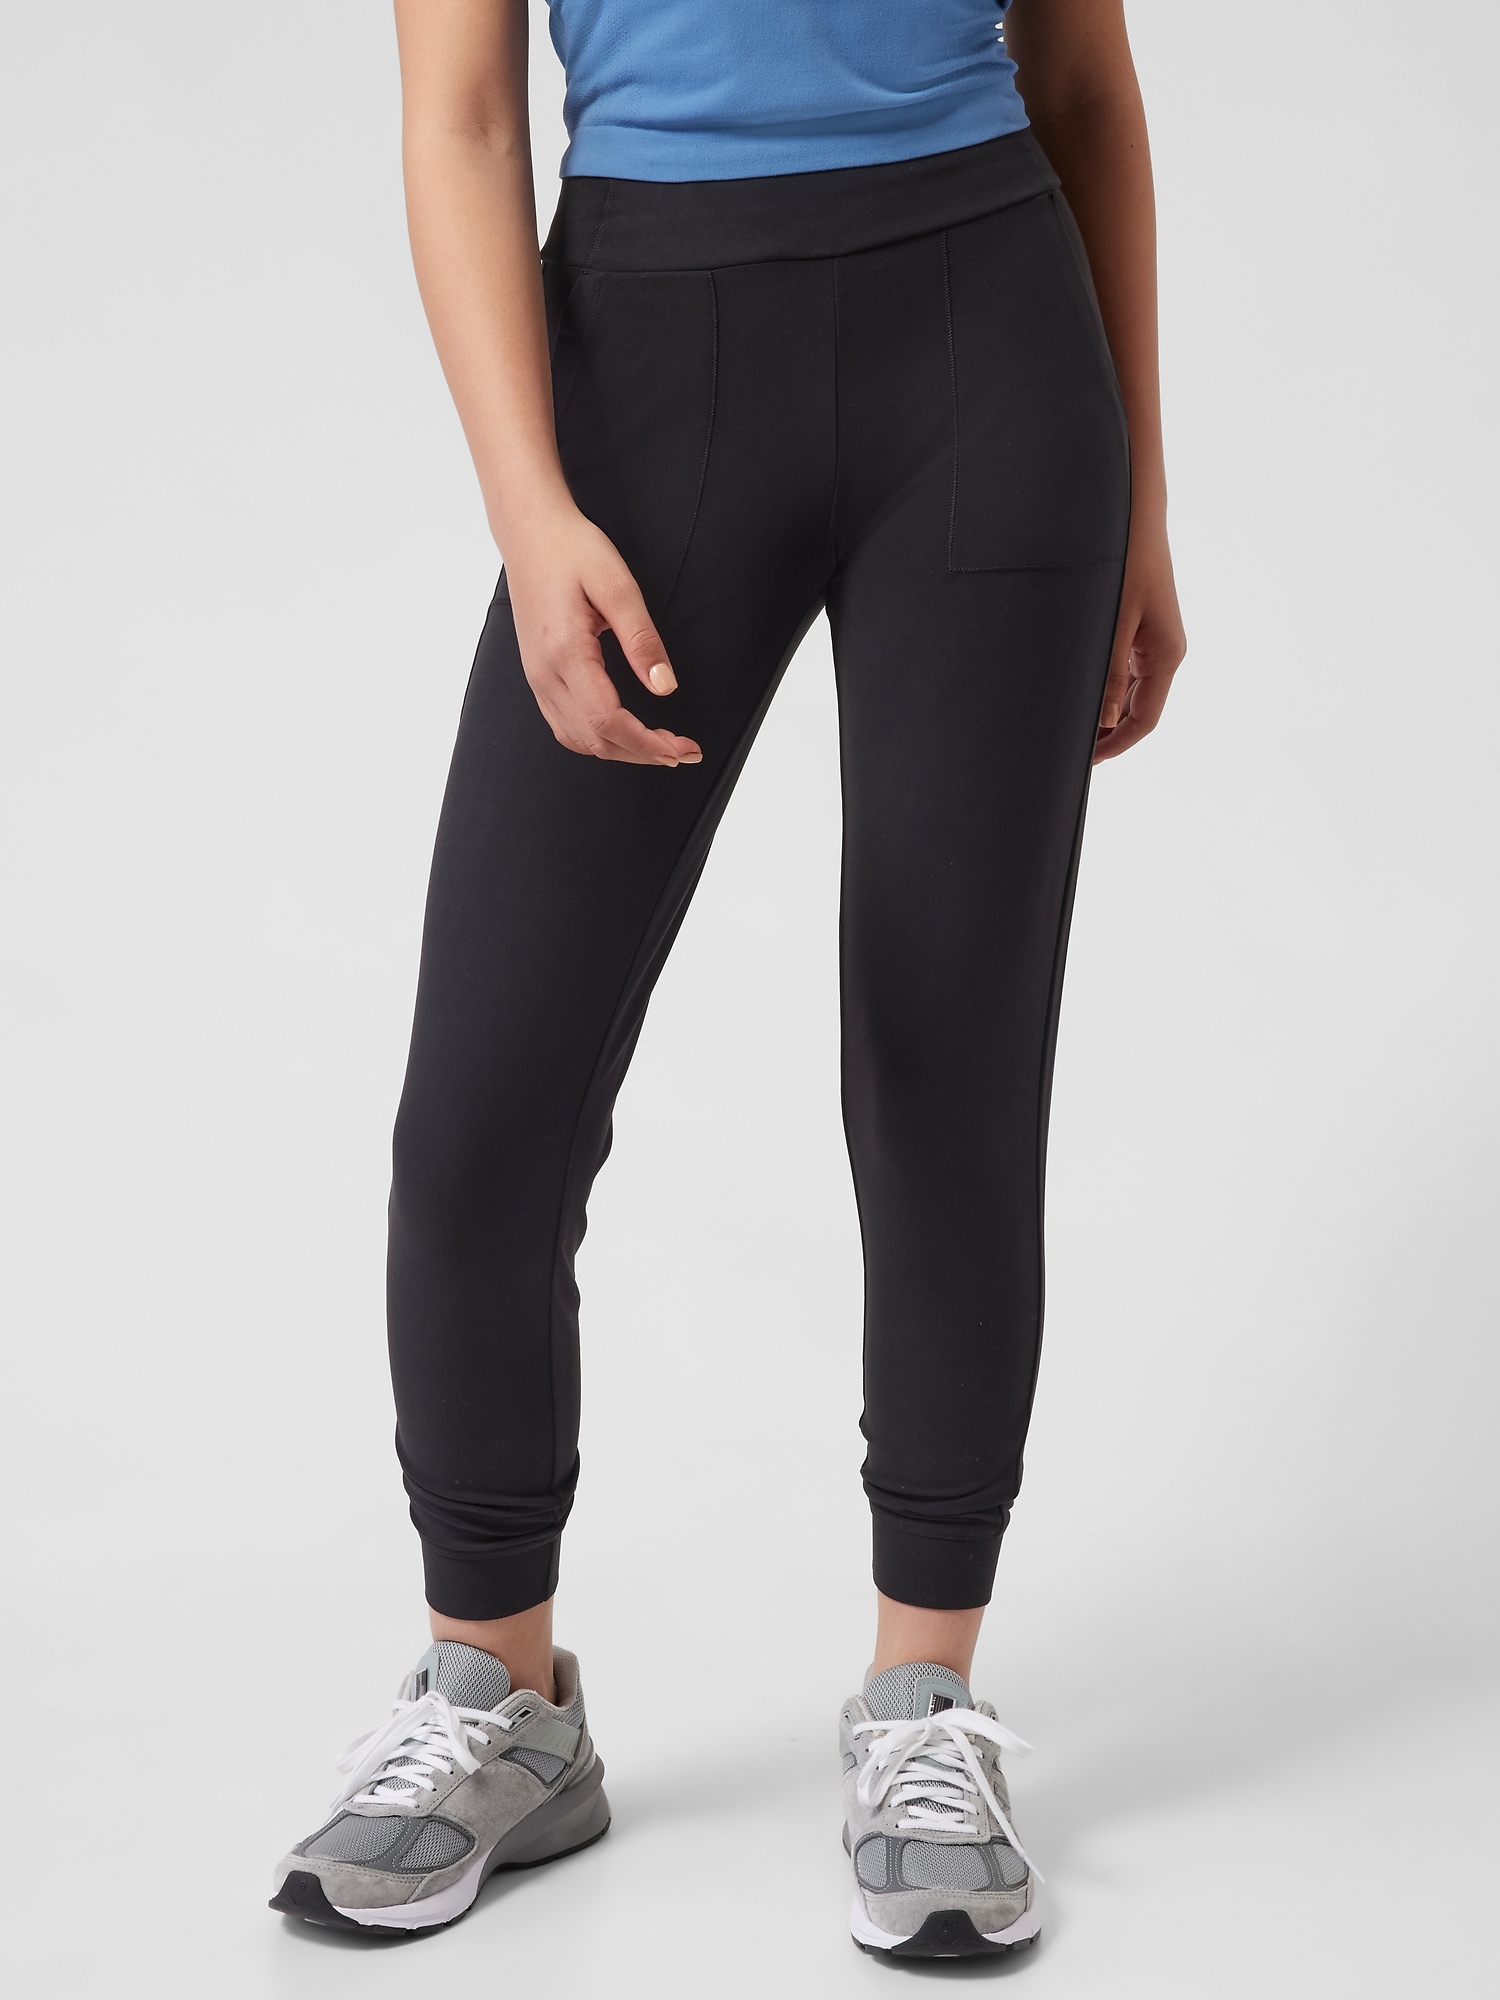 Jogger Leggings With Pockets